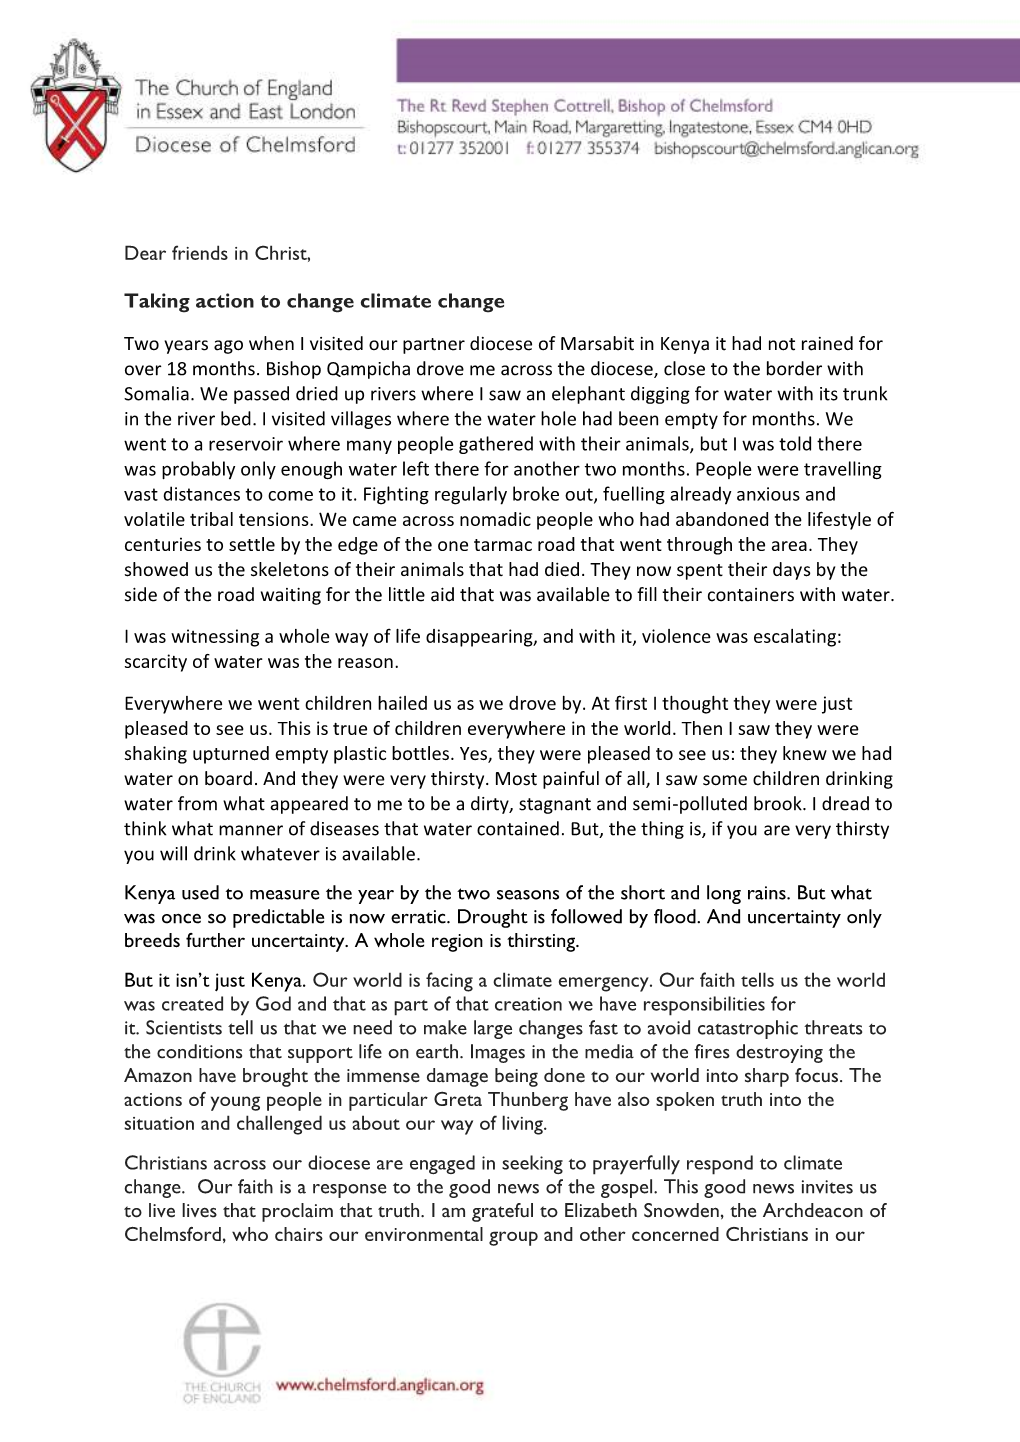 Climate Change Letter from Chelmsford Diocese